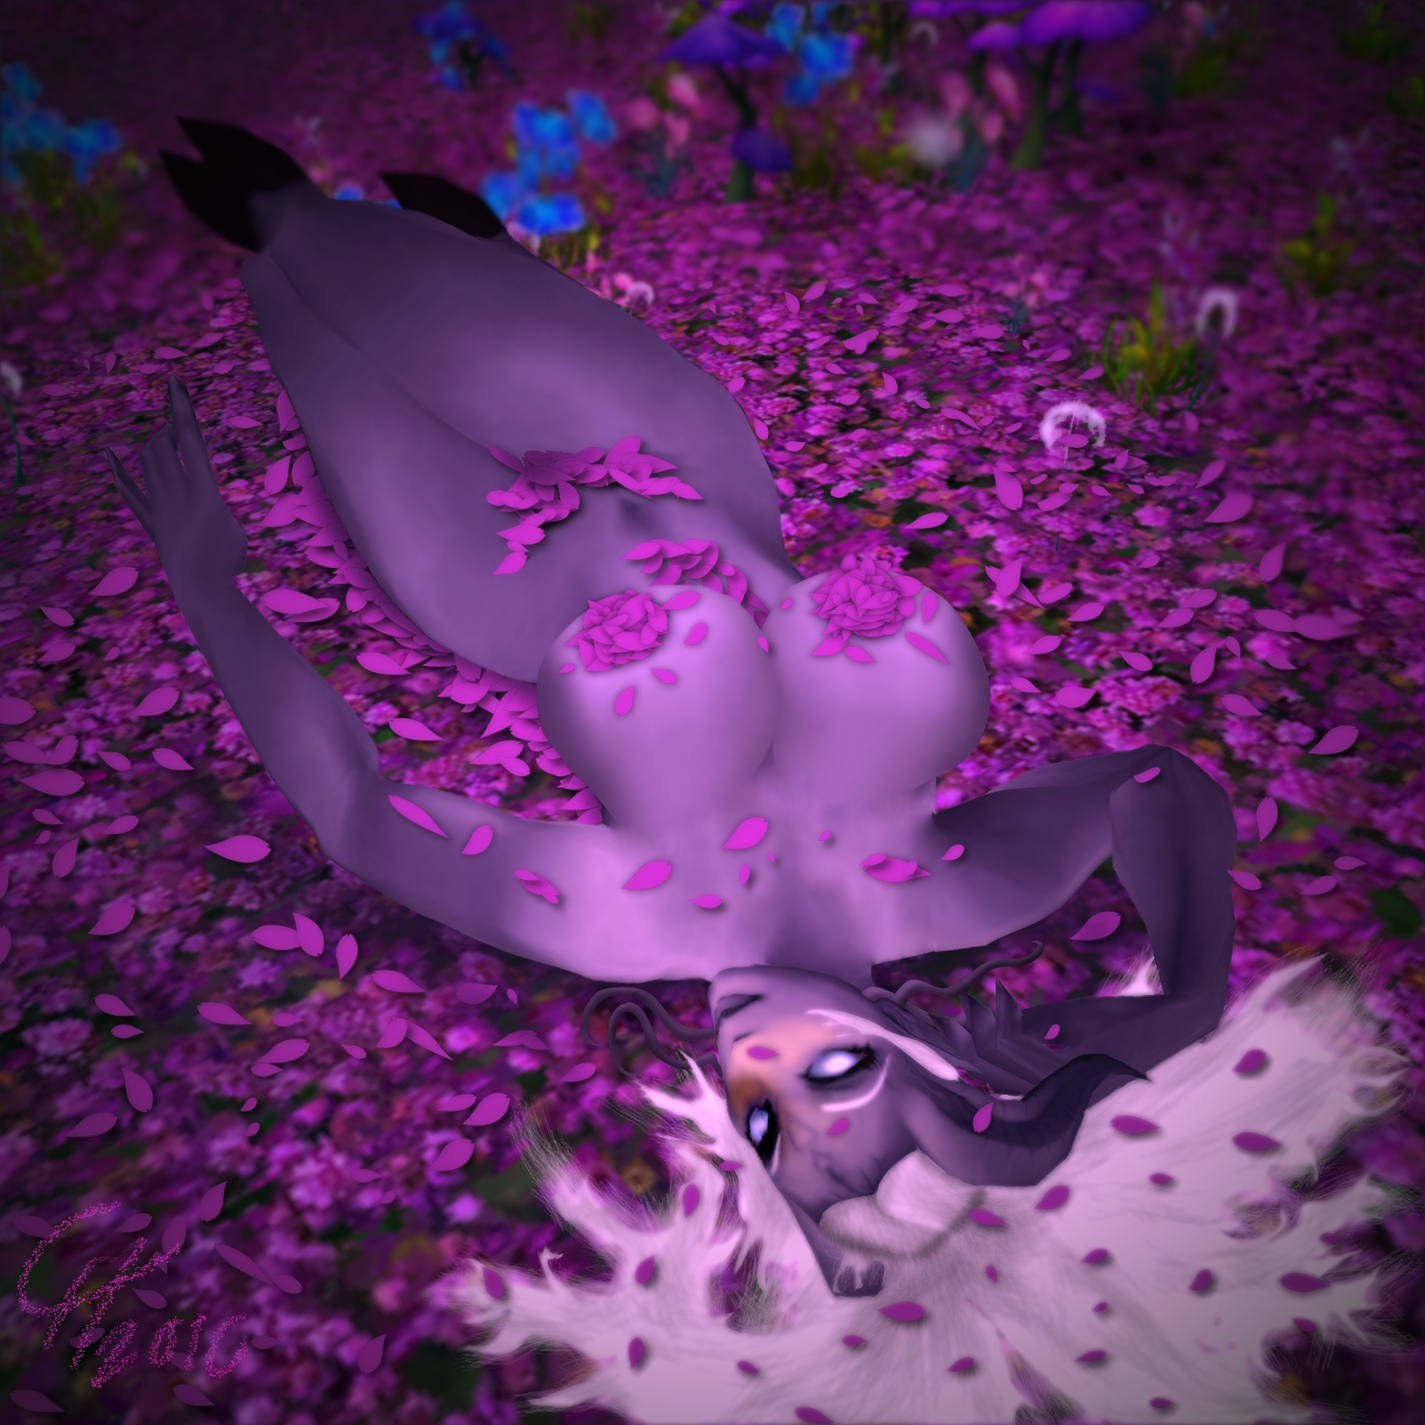 Bed of Flowers [Draenei/Pinup/Tease]
Same say it's from American Beauty, but it really is a parody
a [url=https://en.wikipedia.org/wiki/Nemi_(comic_strip)]Nemi[/url] picture.
Keywords: Draenei;OC;Tease;Pinup;SFW